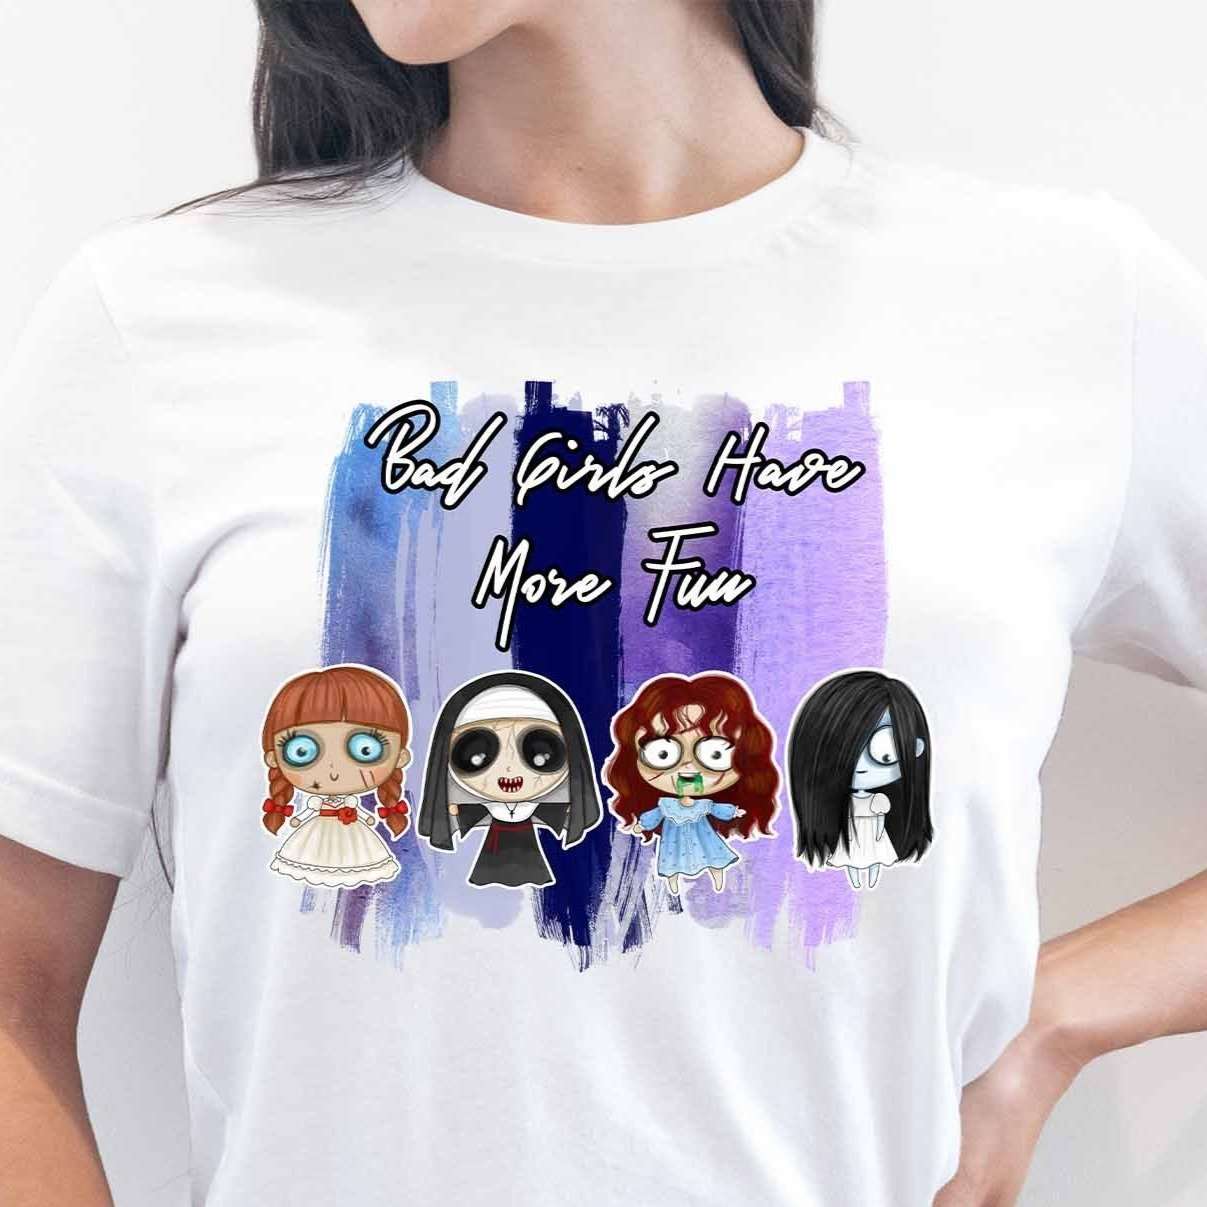 Bad Girls Have More Fun 2 Graphic Tee - My Custom Tee Party